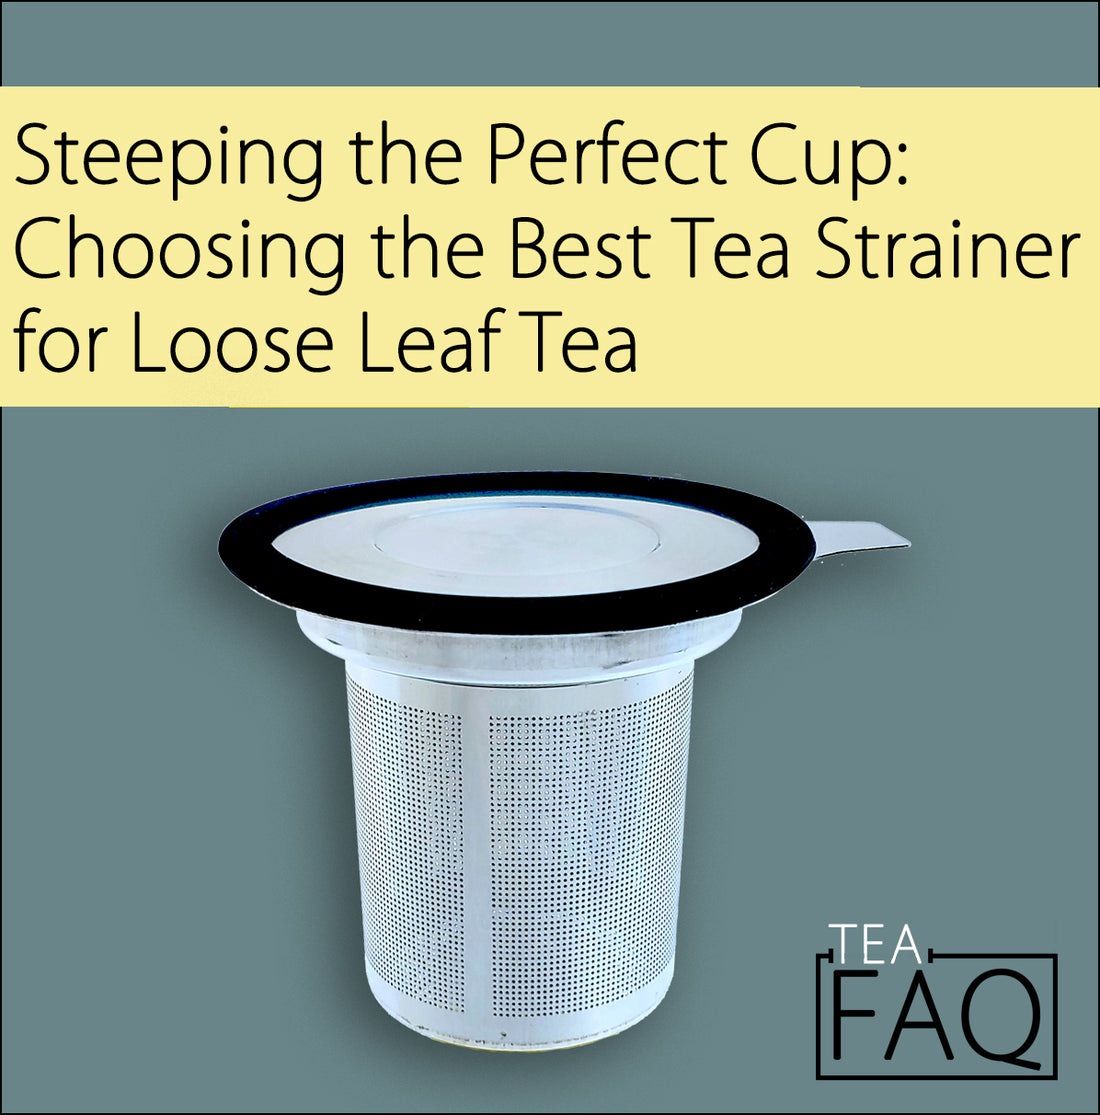 Steeping the Perfect Cup: Choosing The Best Tea Strainer for Loose Leaf Tea